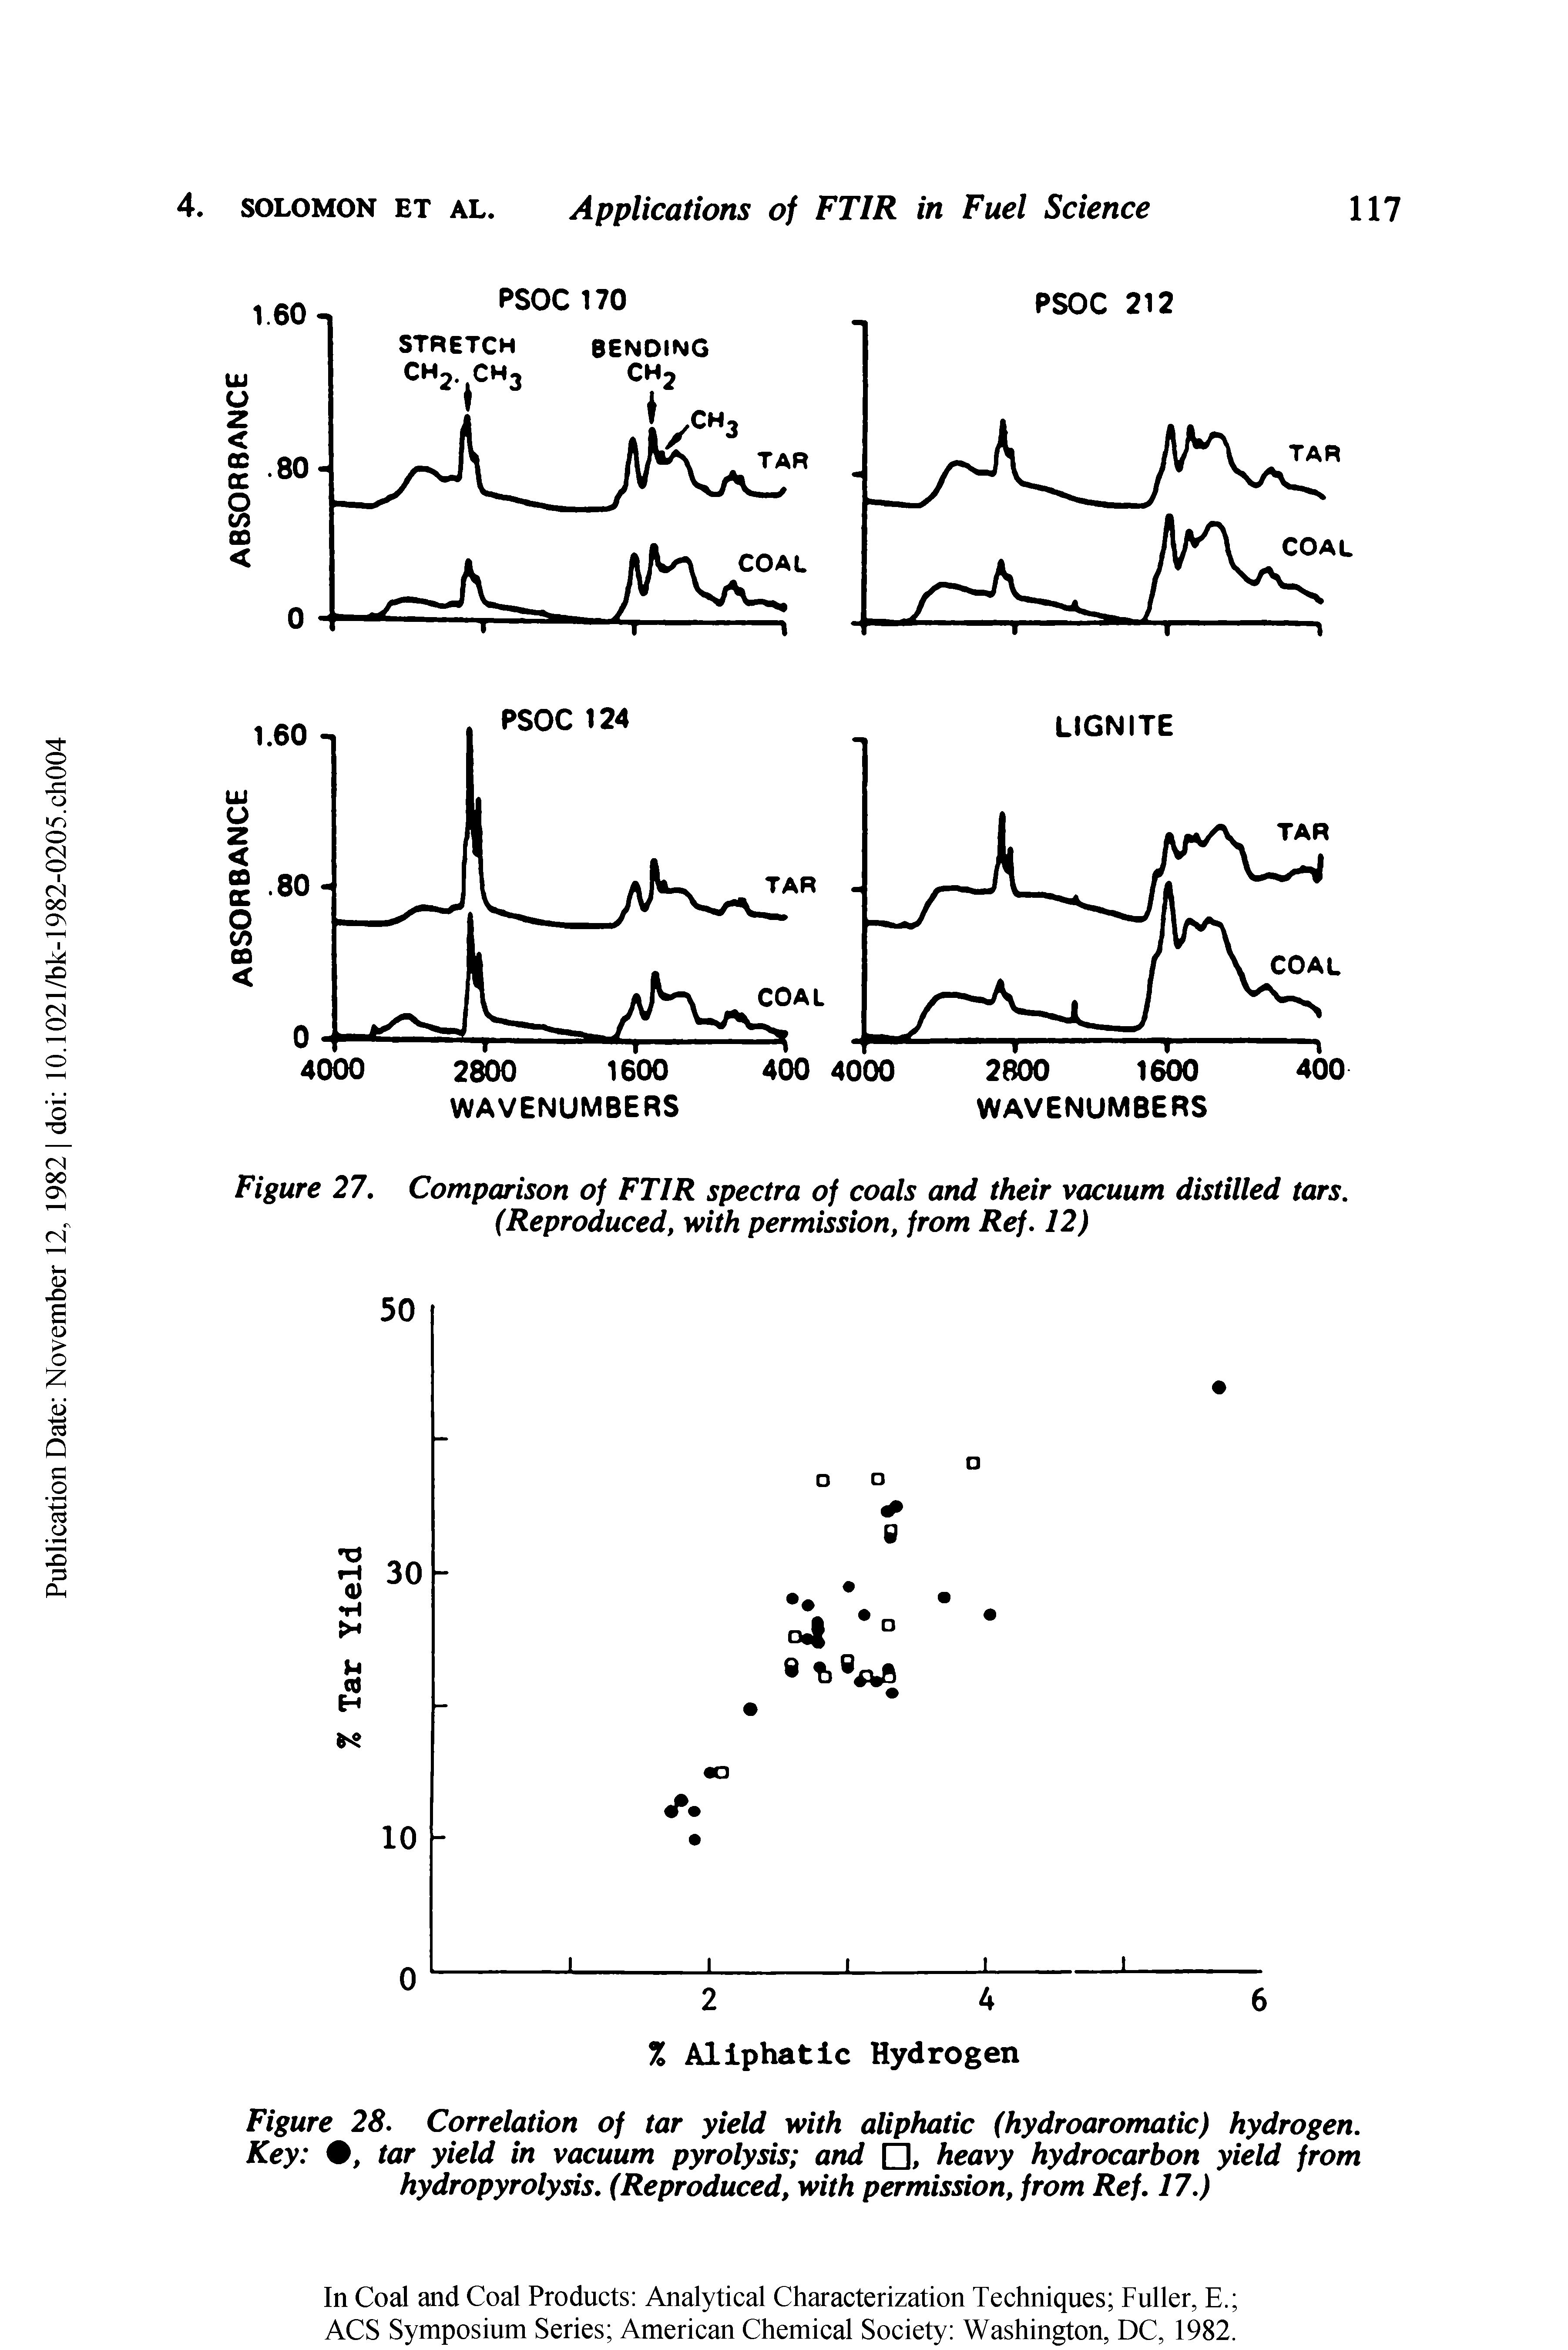 Figure 28. Correlation of tar yield with aliphatic (hydroaromatic) hydrogen. Key %, tar yield in vacuum pyrolysis and , heavy hydrocarbon yield from hydropyrolysis. (Reproduced, with permission, from Ref. 17.)...